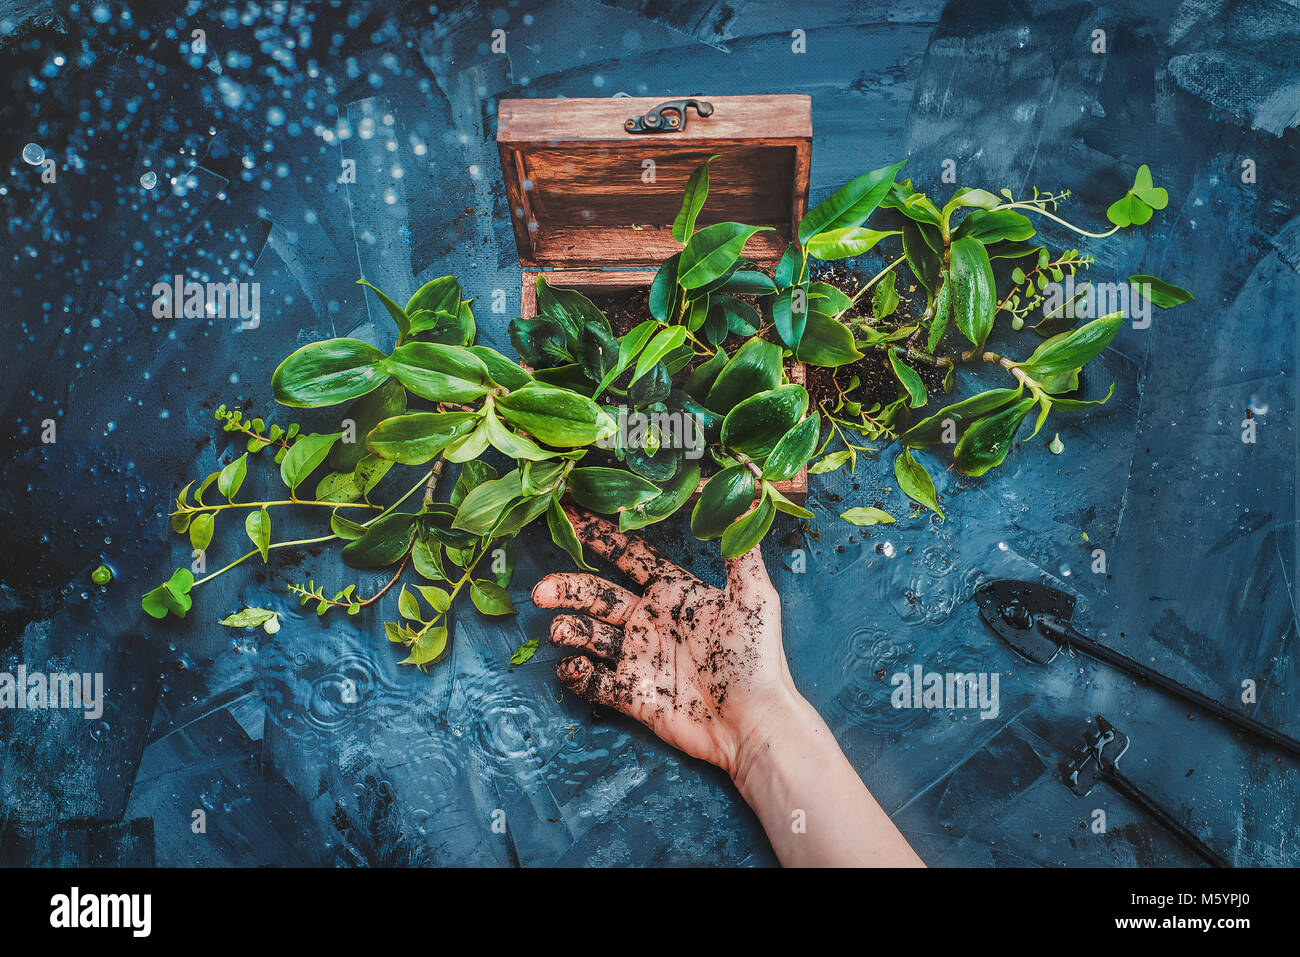 Spring gardening with a box of emerging green plants, water drops, and small spades. Green thumb concept. Botanical still life with copy space. Stock Photo